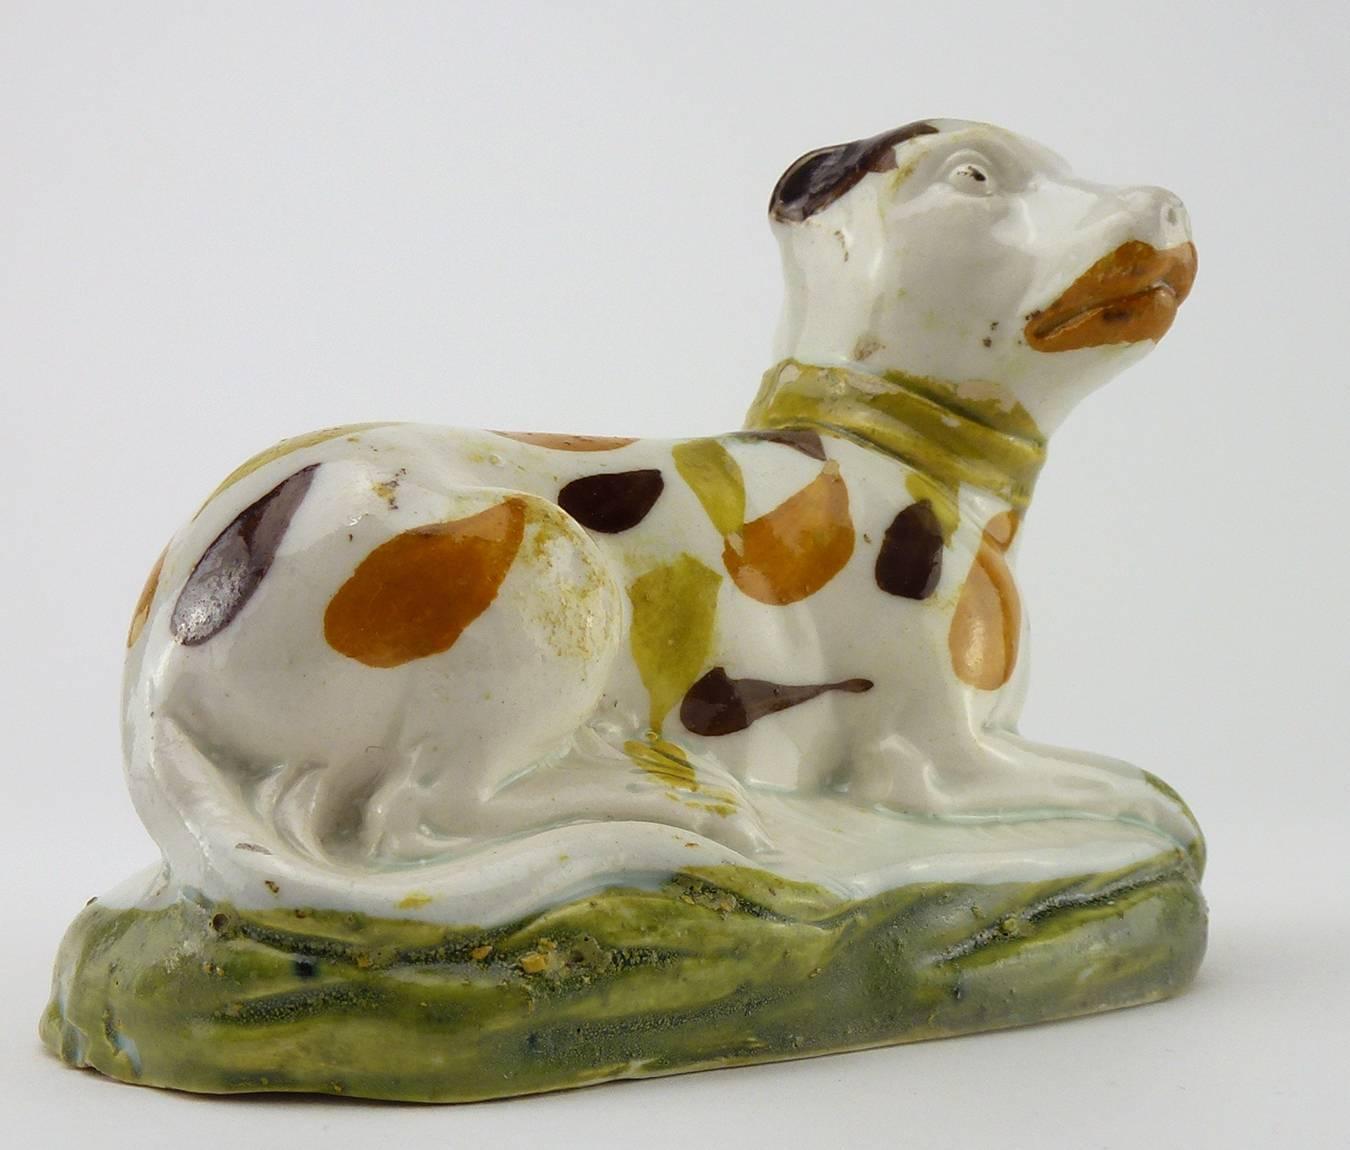 English Yorkshire pearlware prattware figure of recumbent hound dog, modelled on a low-mounded ovular base, painted green. The white dog with ocher, yellow, brown spltches, and prominent enameling to its lips, dots on eyes, and brownband over the